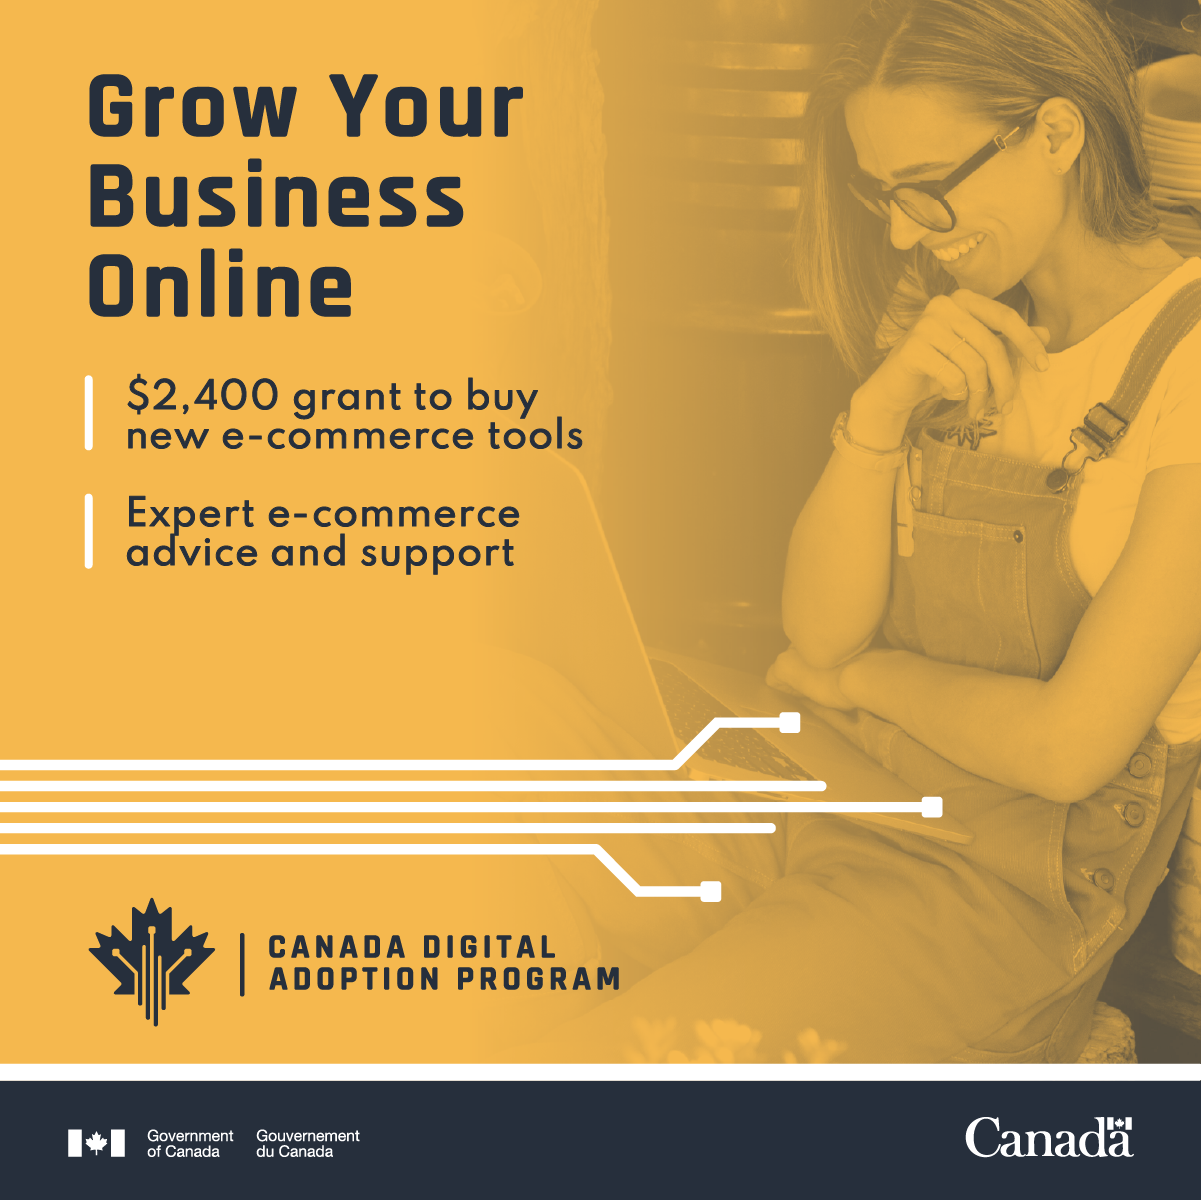 Woman wearing glasses and overalls smiles while looking at her laptop. With text: Grow Your Business Online; $2400 grant to buy new e-commerce tools; expert e-commerce advice and support; Canada Digital Adoption Program. 